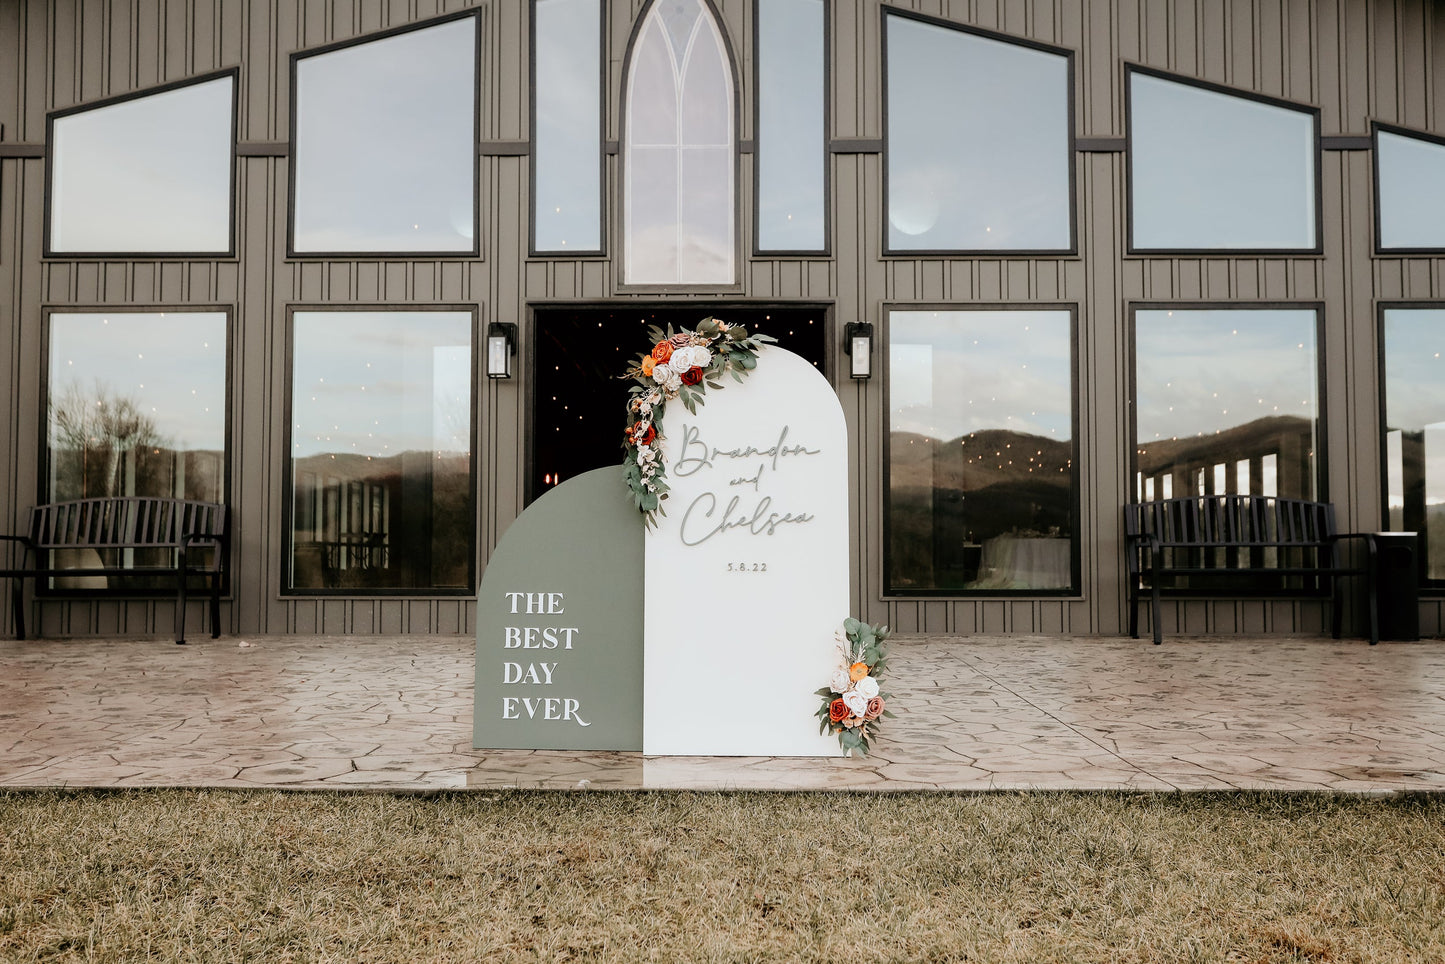 RENTAL 3D Large Wood Arch Set Wedding and Event Signage with Custom Lettering